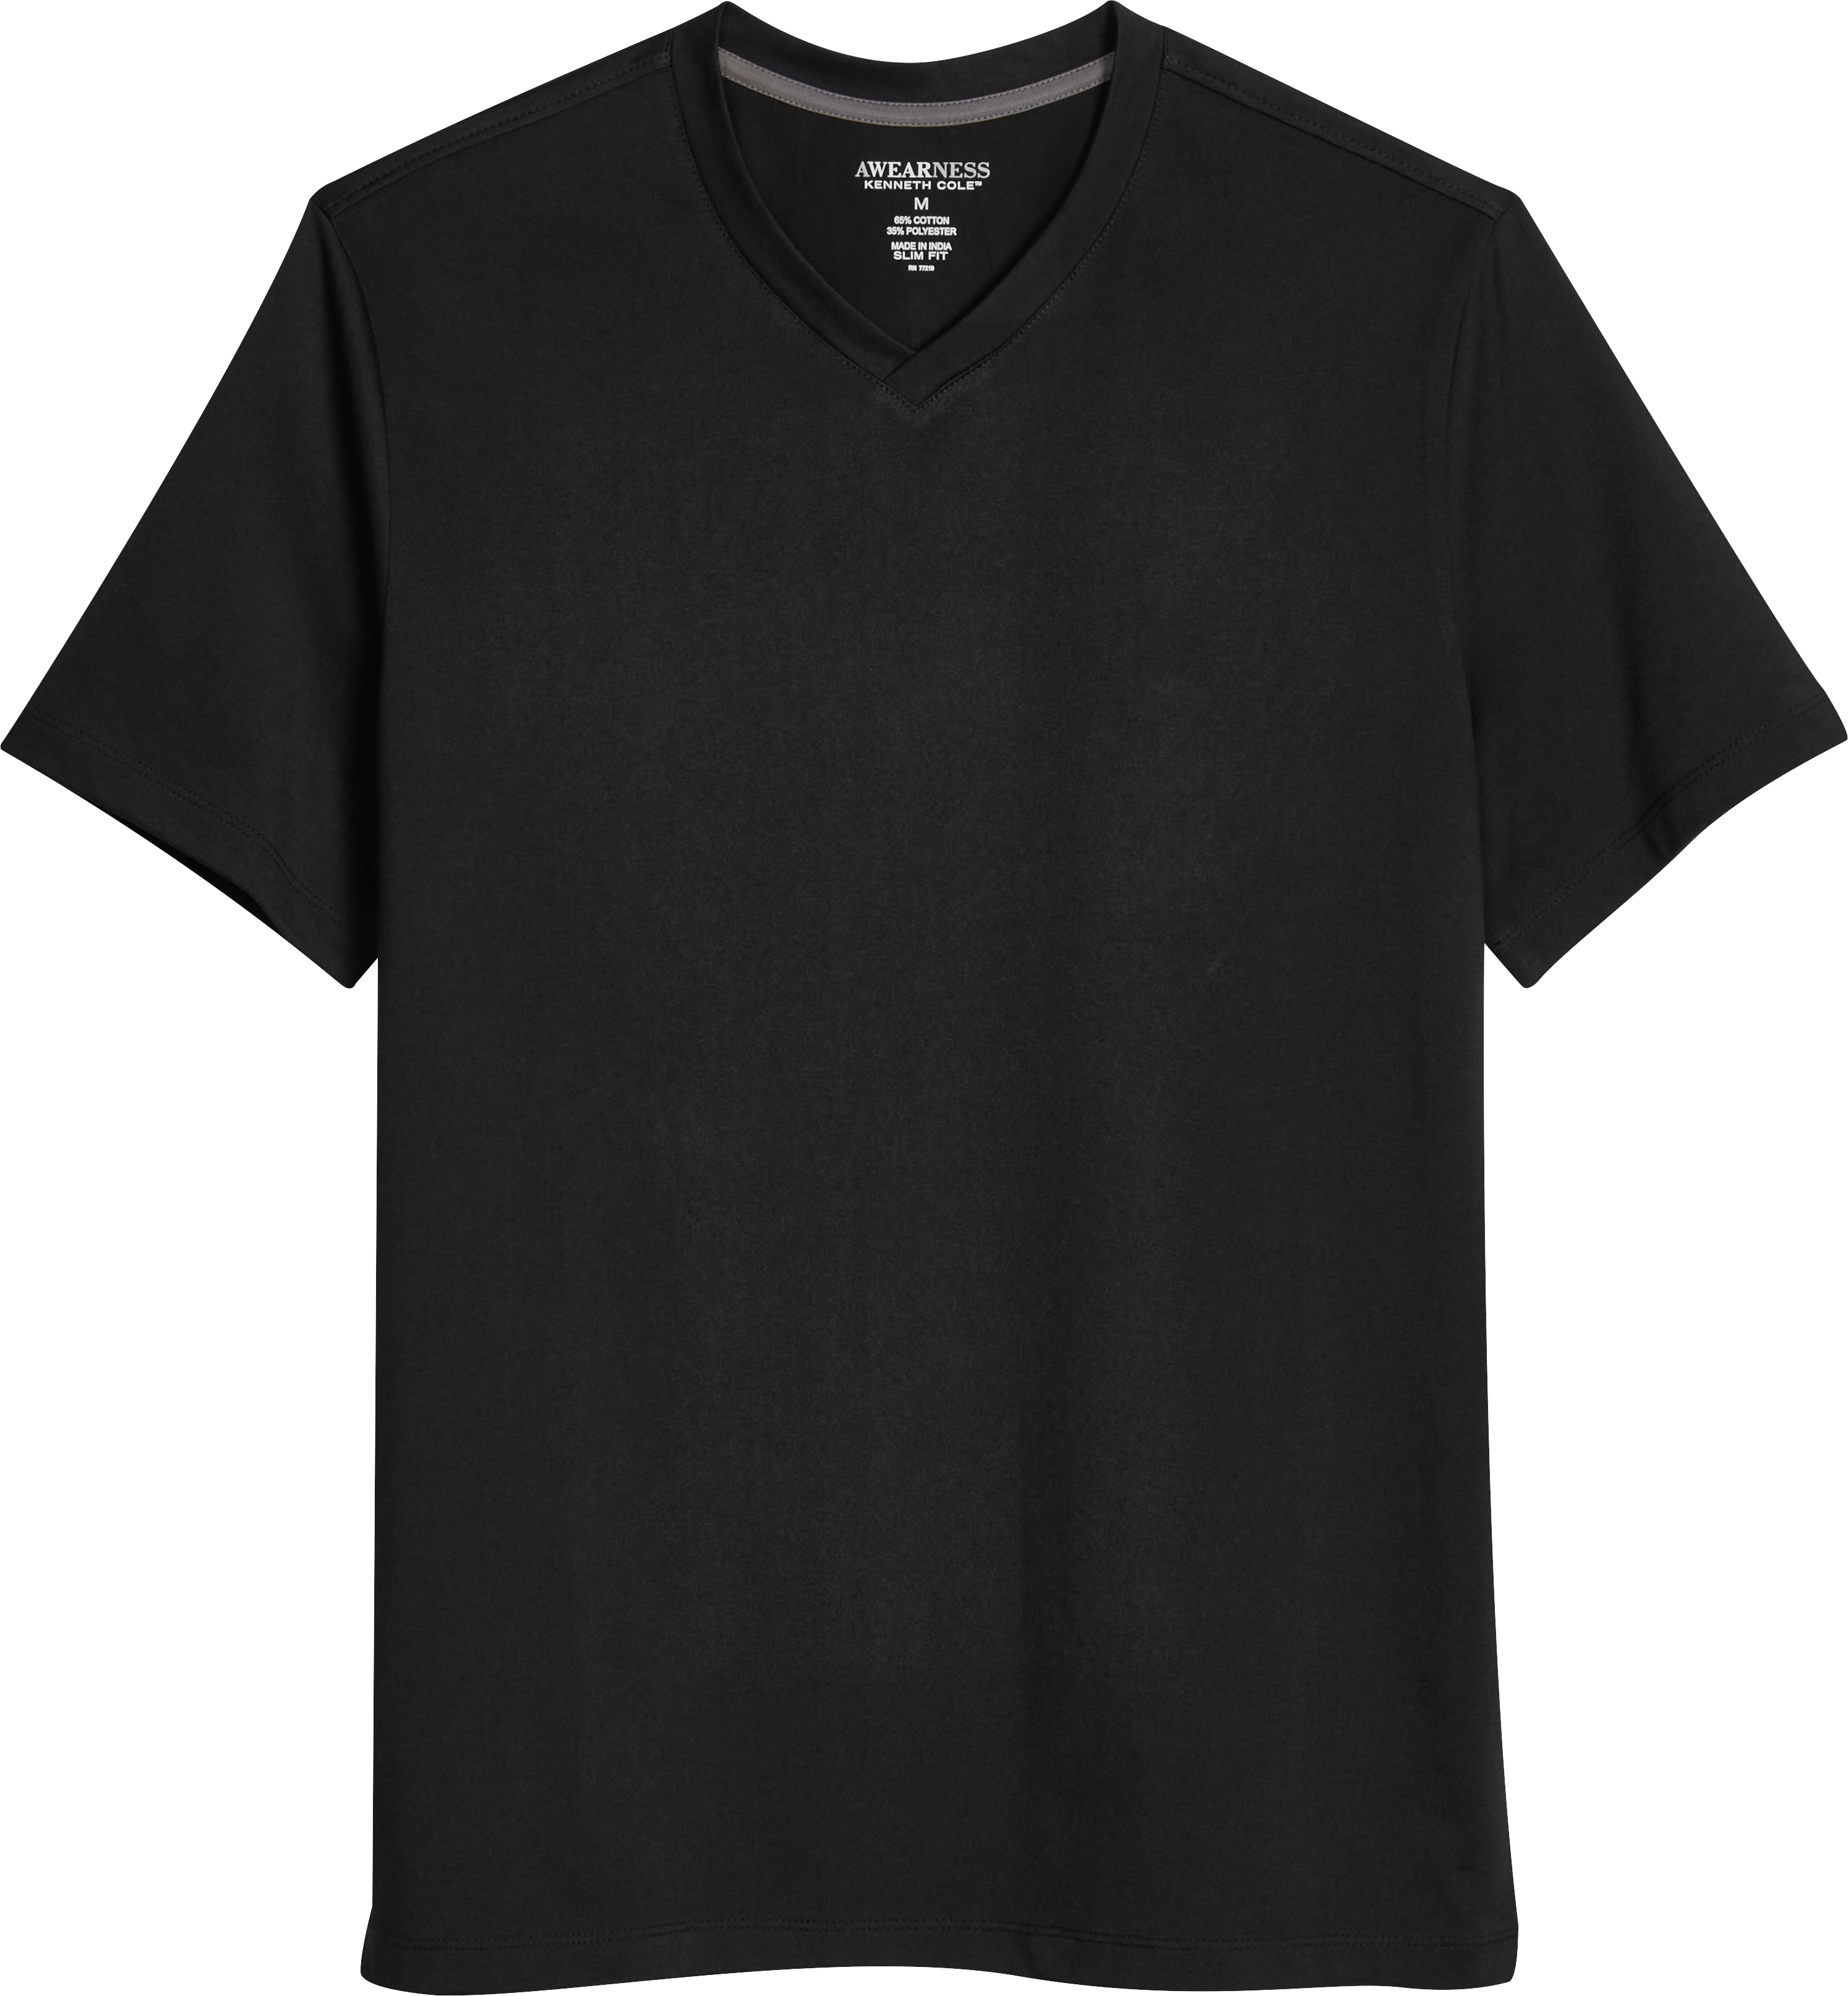 Awearness Kenneth Cole Modern Fit V-neck T-shirt